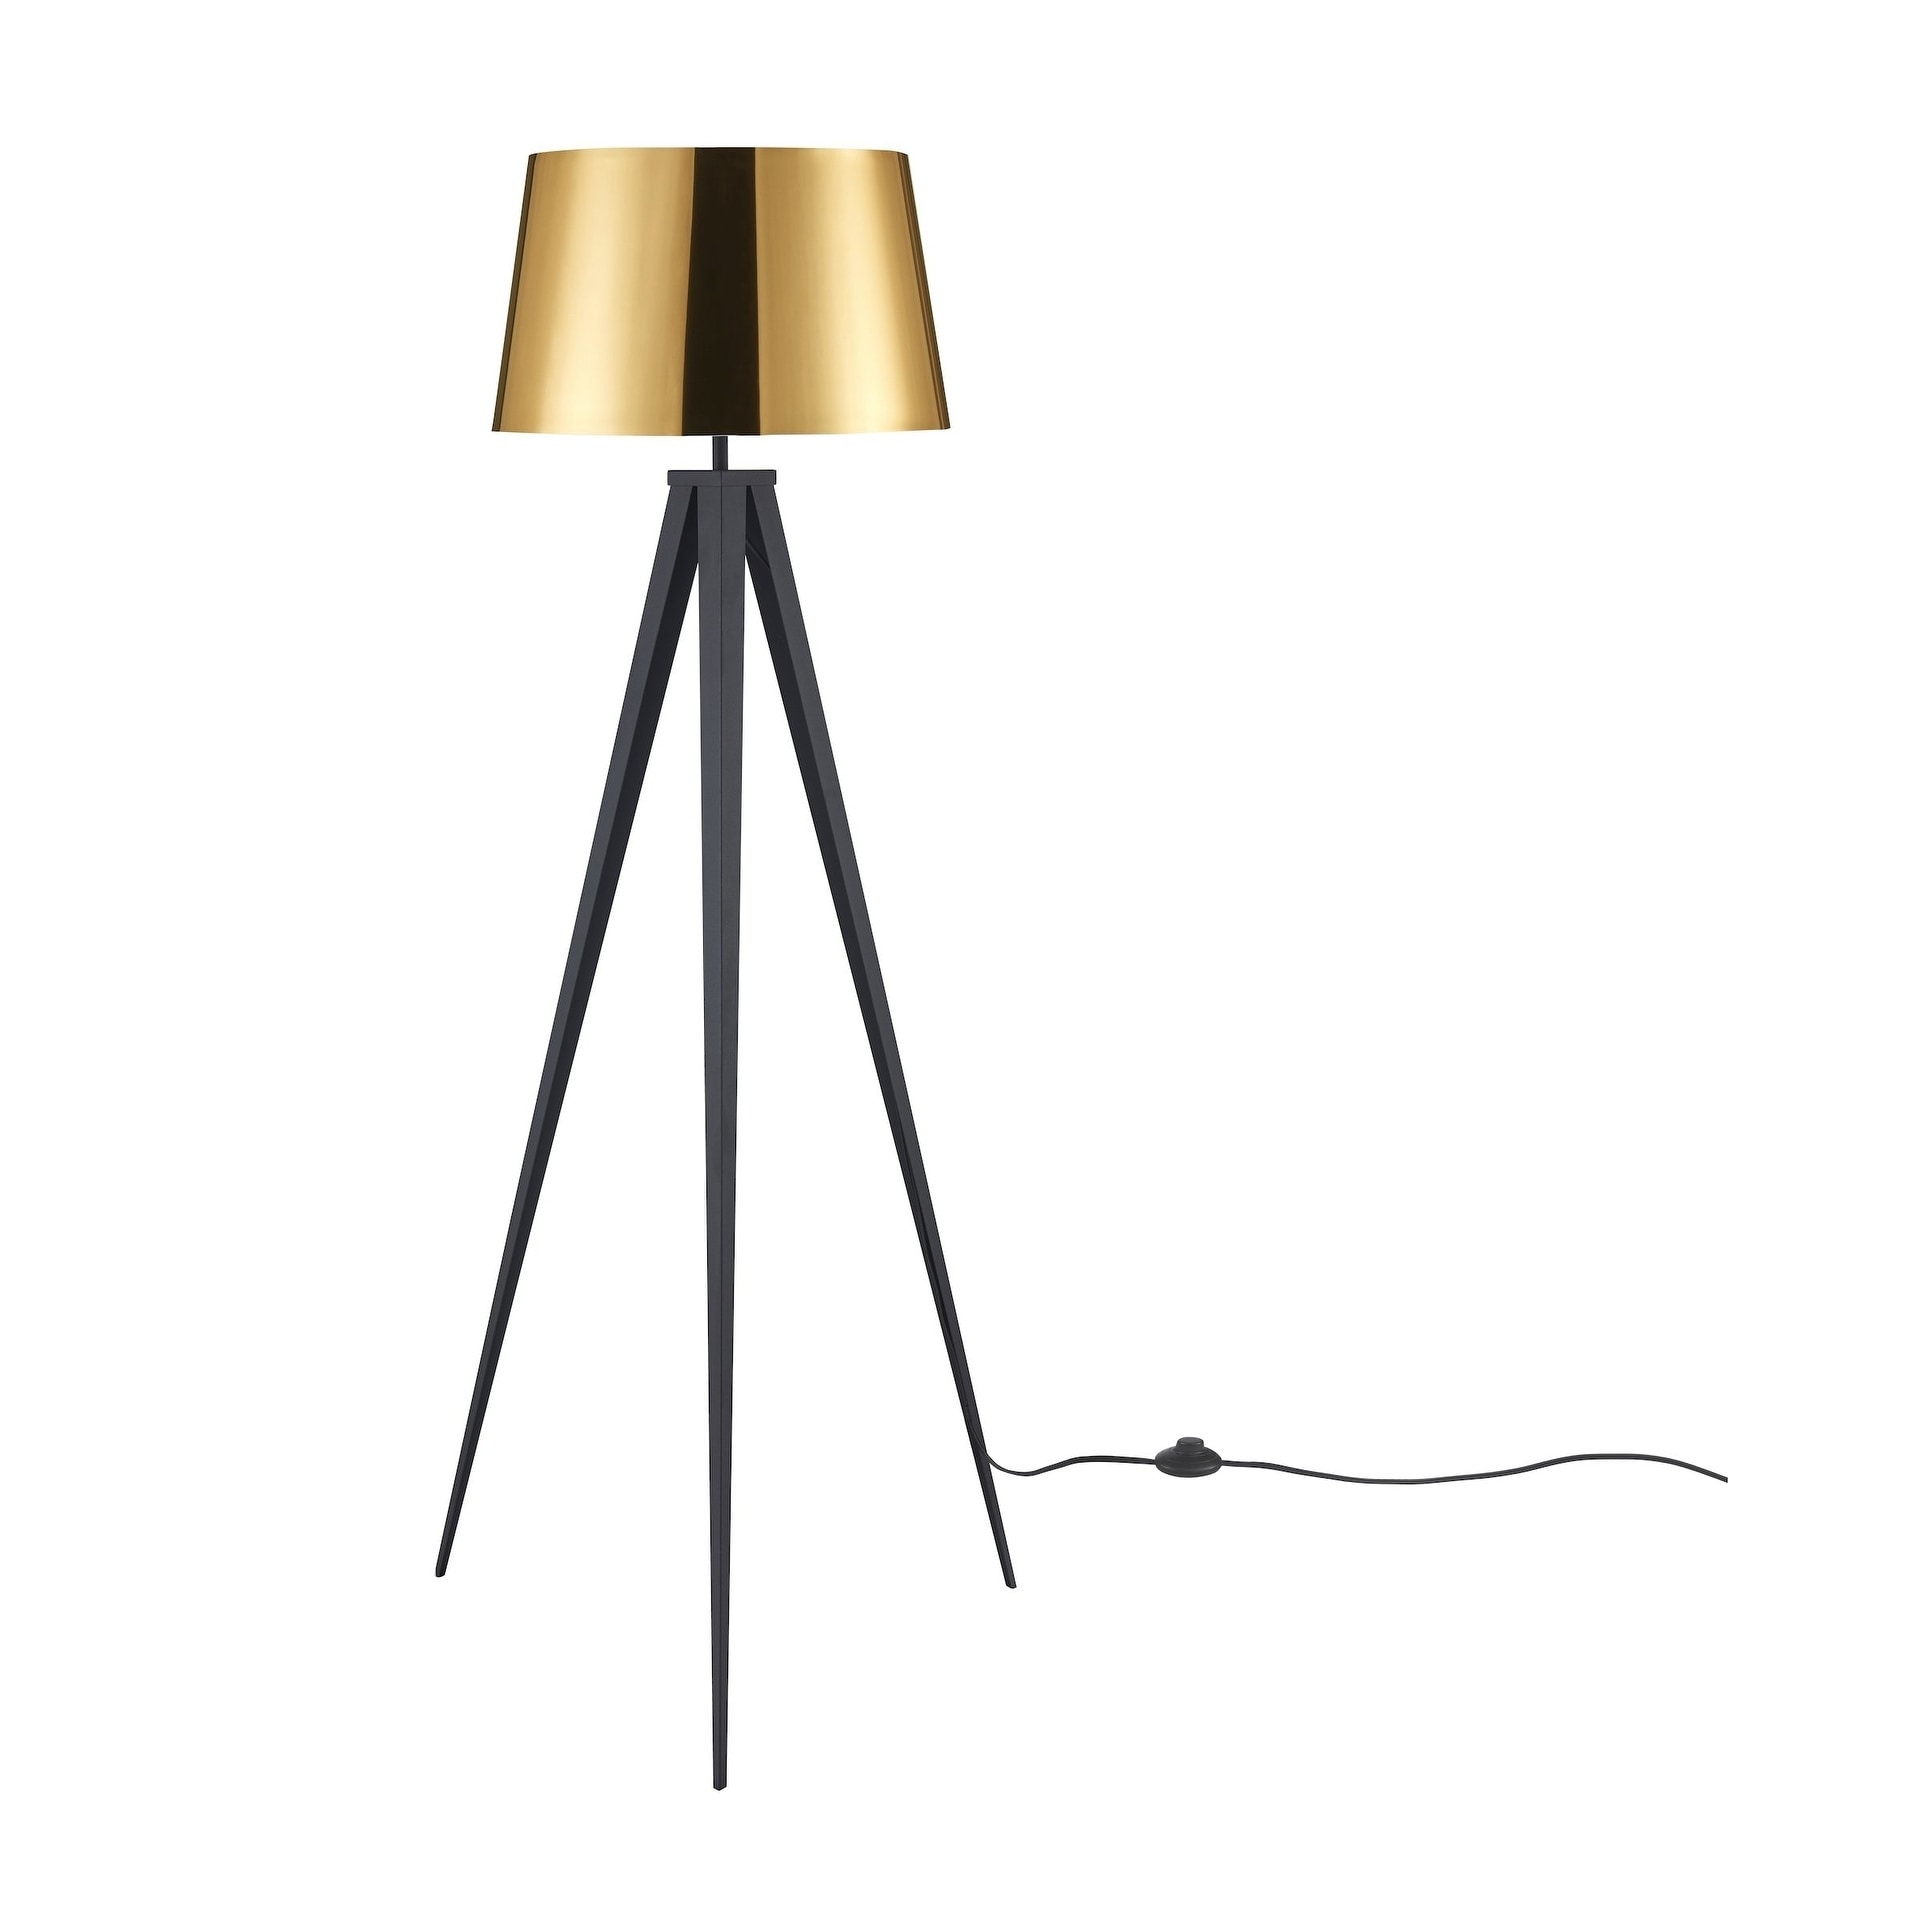 Euro Style Collection Berlin 60 Tripod Floor Lamp Black Gold Black Gold On Sale Overstock 26507819